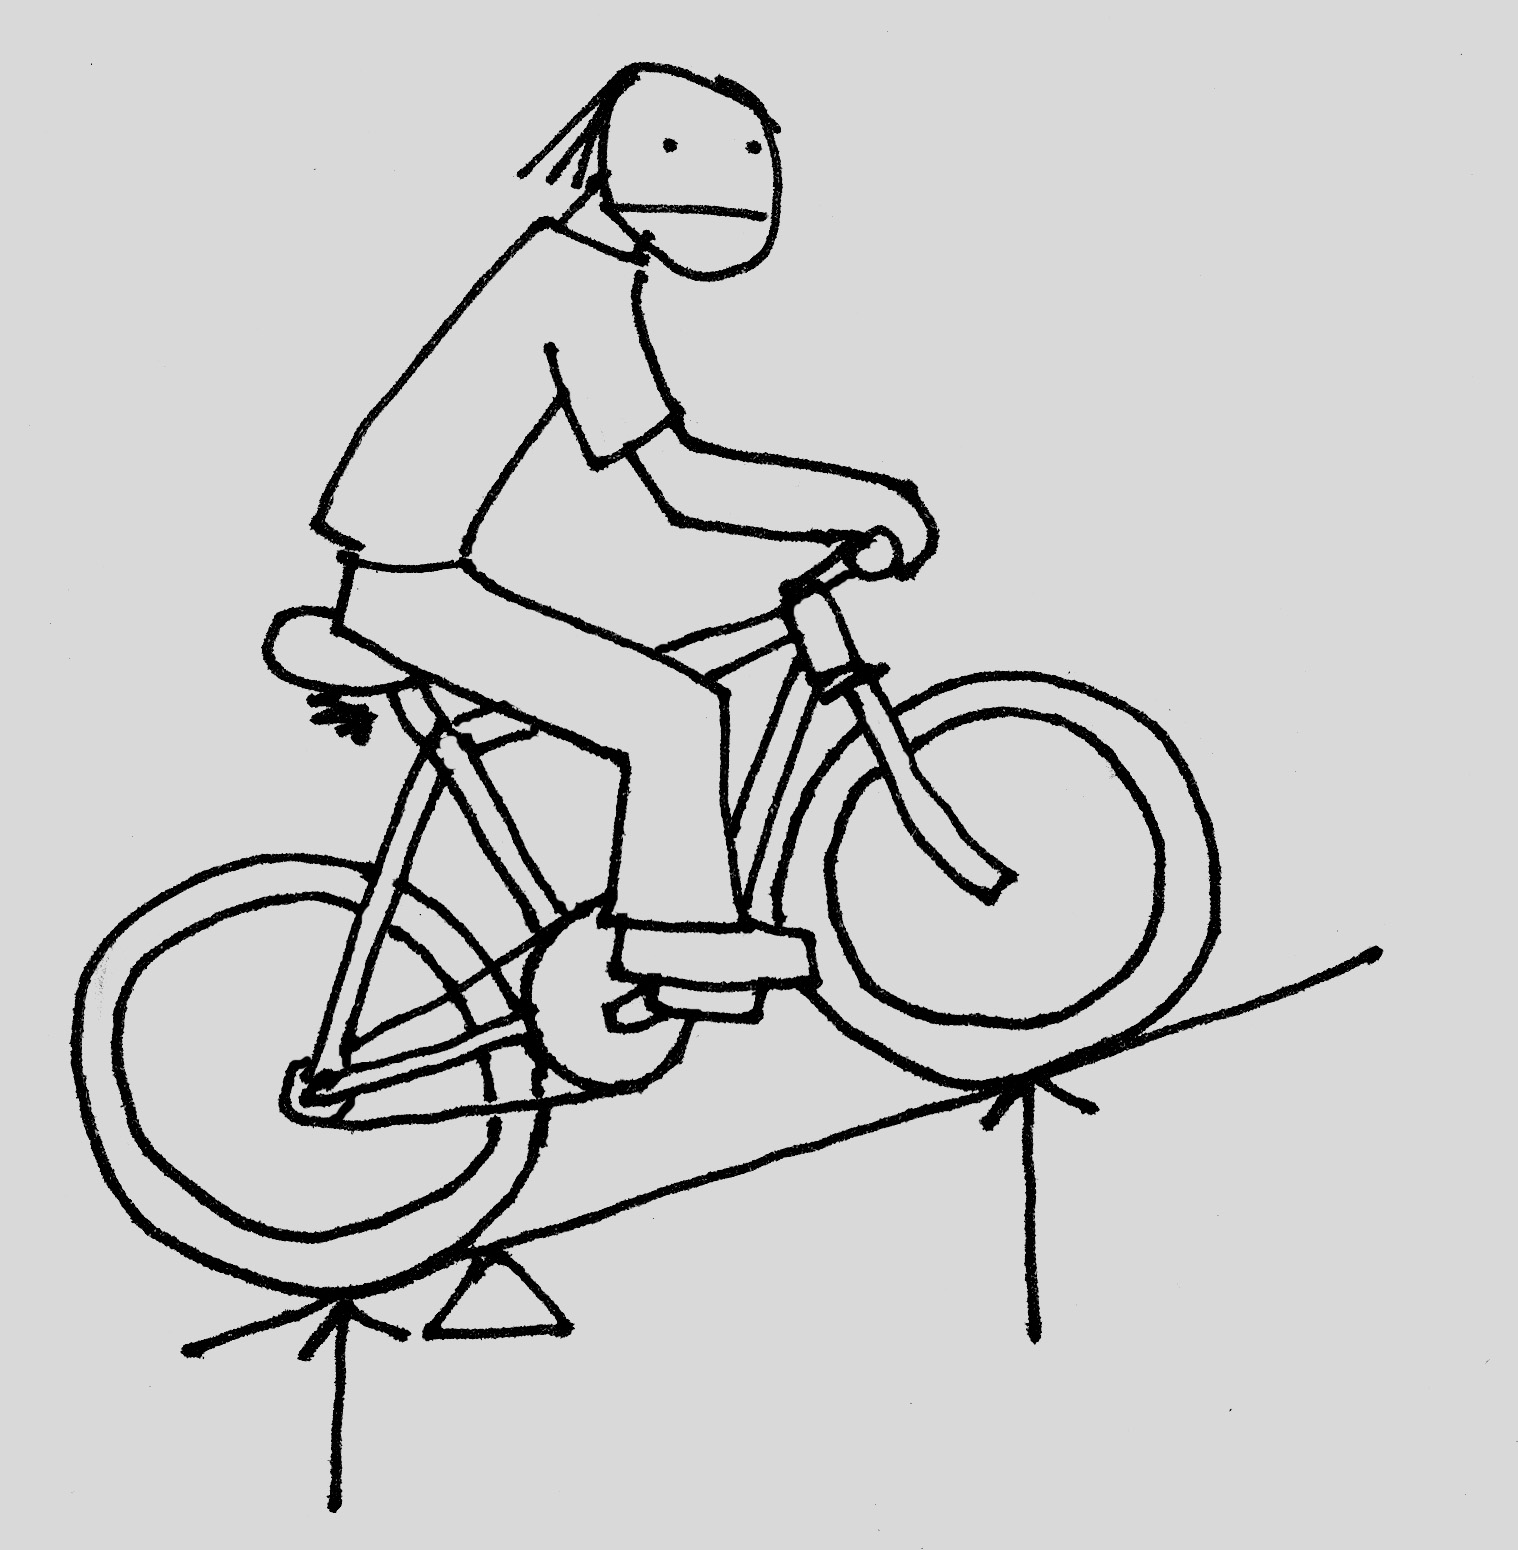 bicycle and rider going uphill, center of gravity slightly toward the back